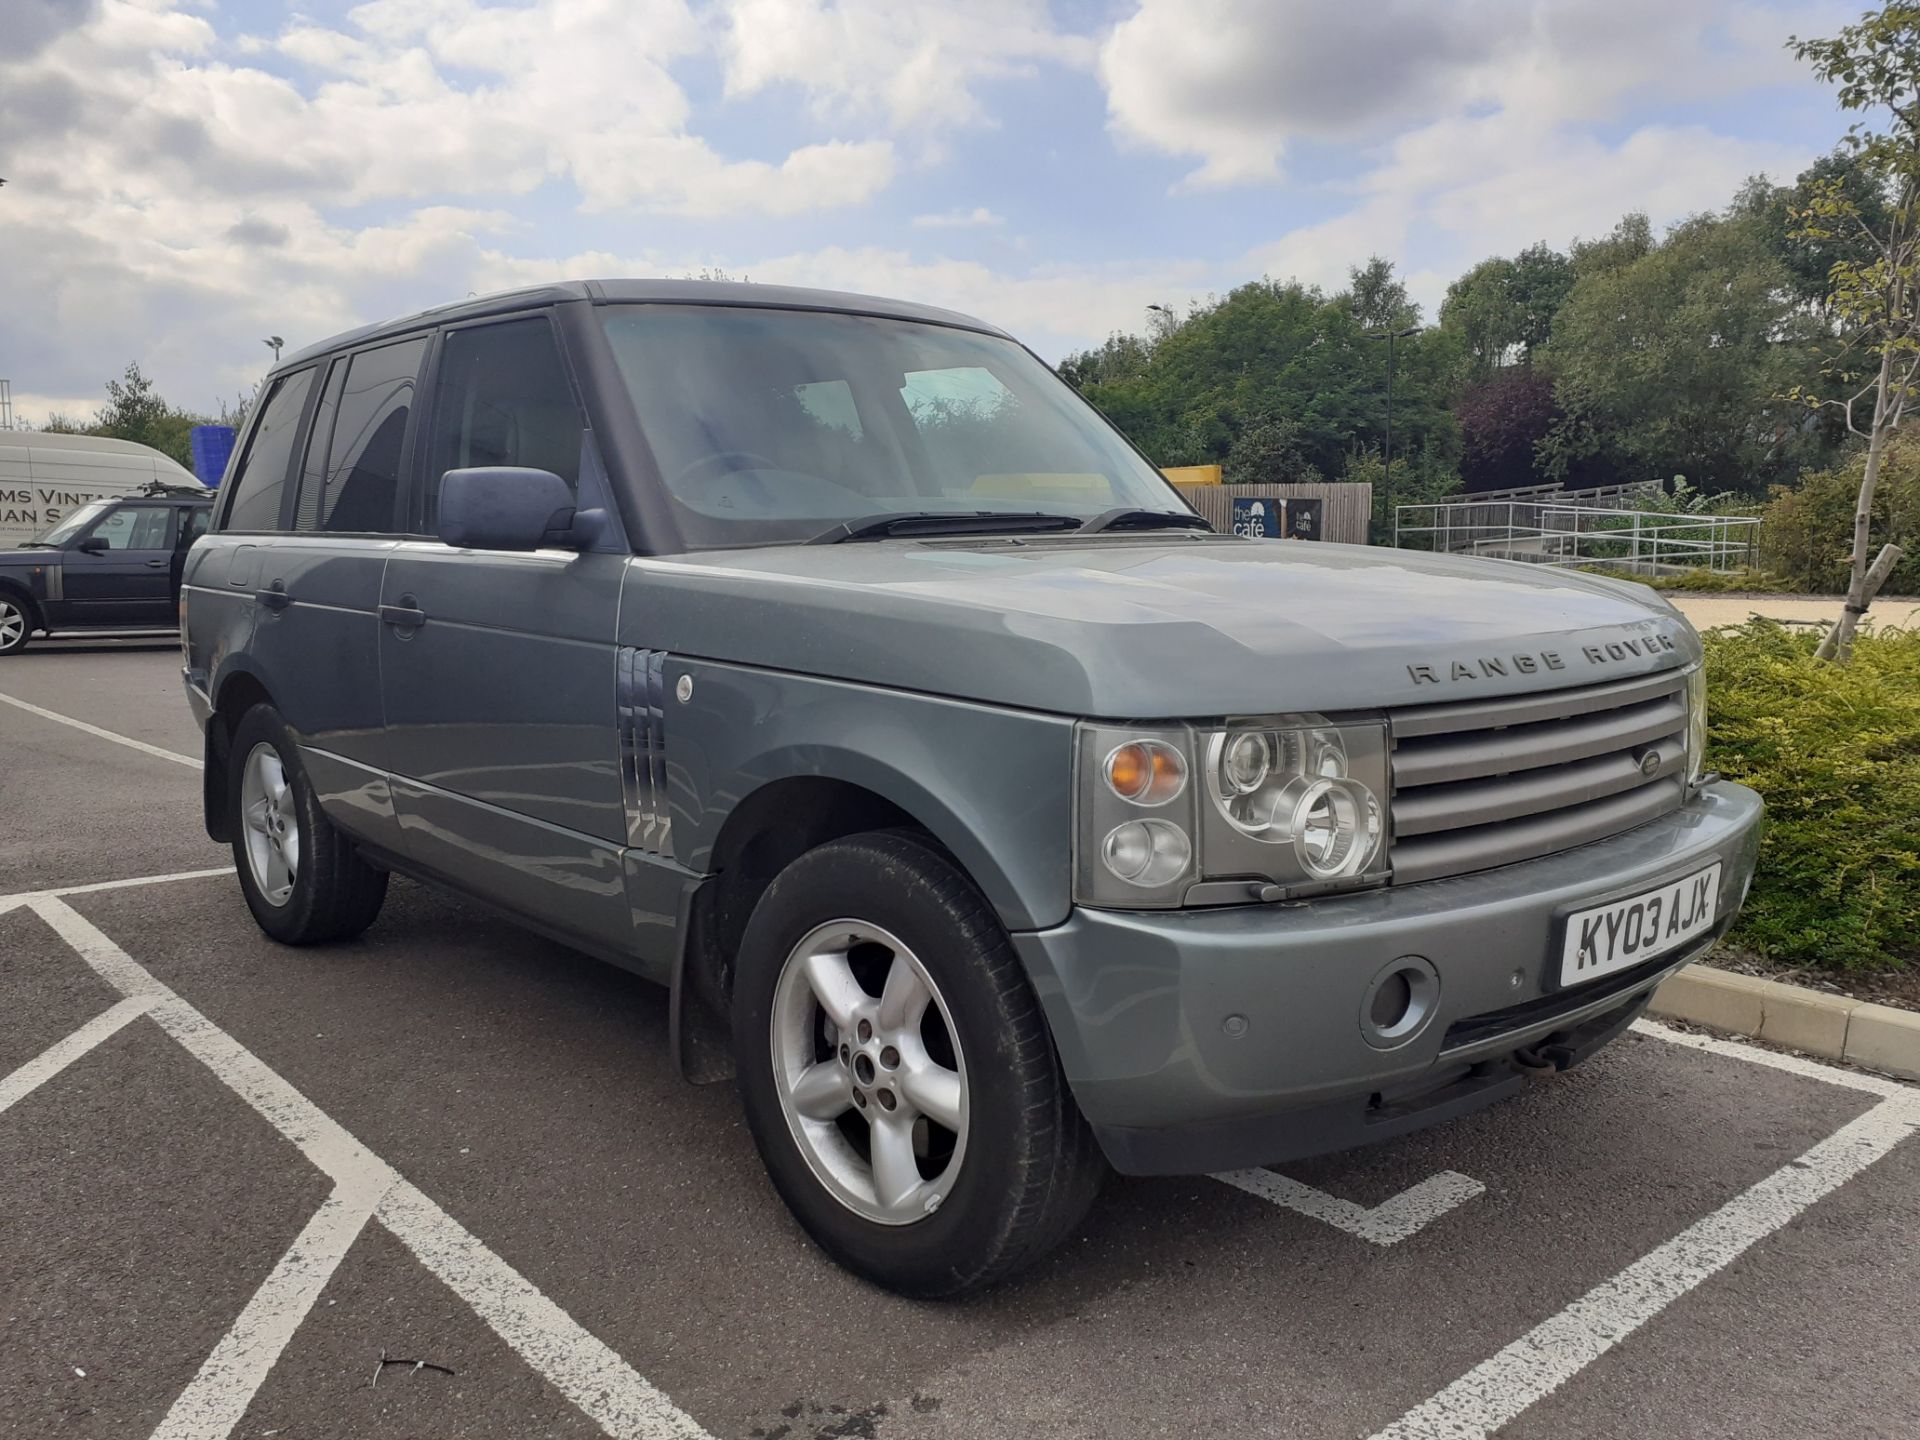 KY03 AJX, Land Rover, Range Rover HSE TD6 Auto, 2926cc in green, first registered 01/03/2003, MOT